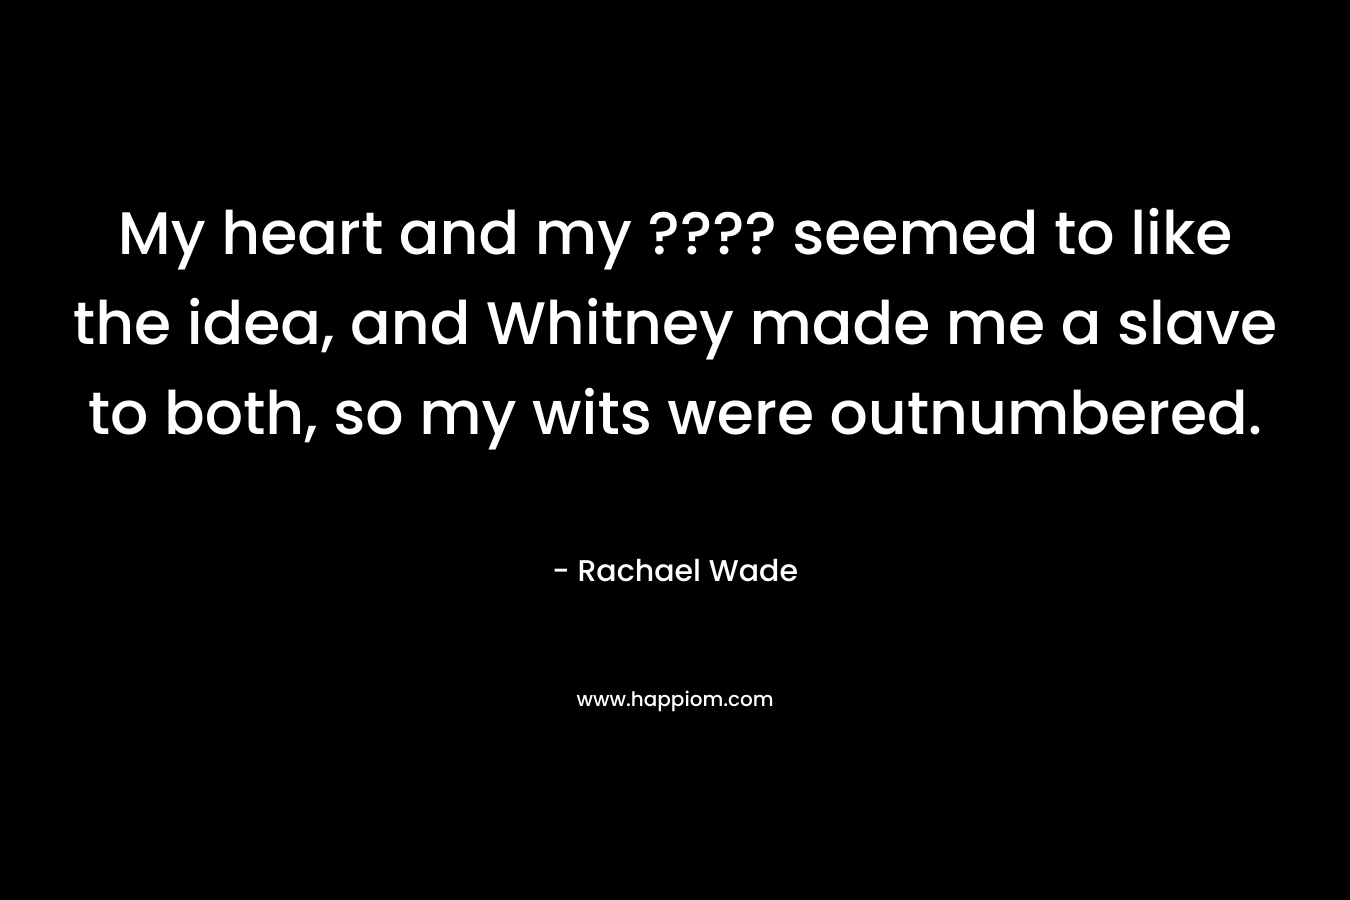 My heart and my ???? seemed to like the idea, and Whitney made me a slave to both, so my wits were outnumbered. – Rachael Wade